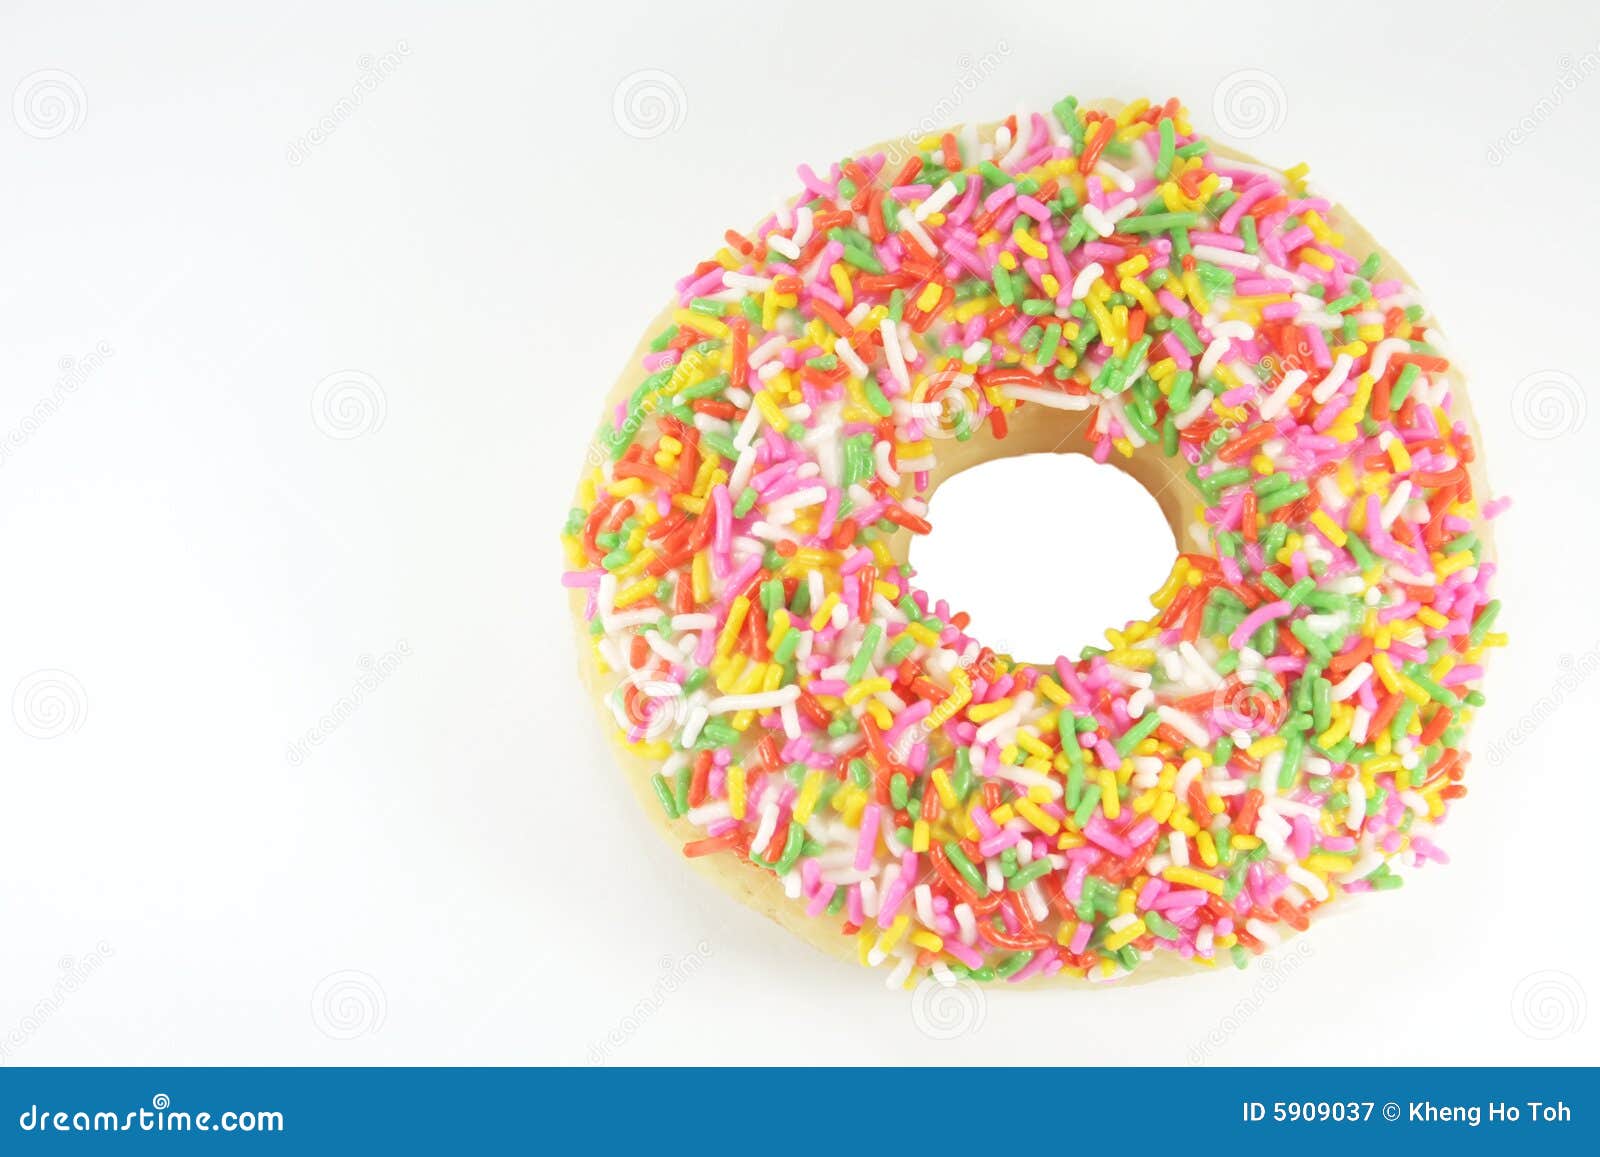 donut with colored rice sprinkle